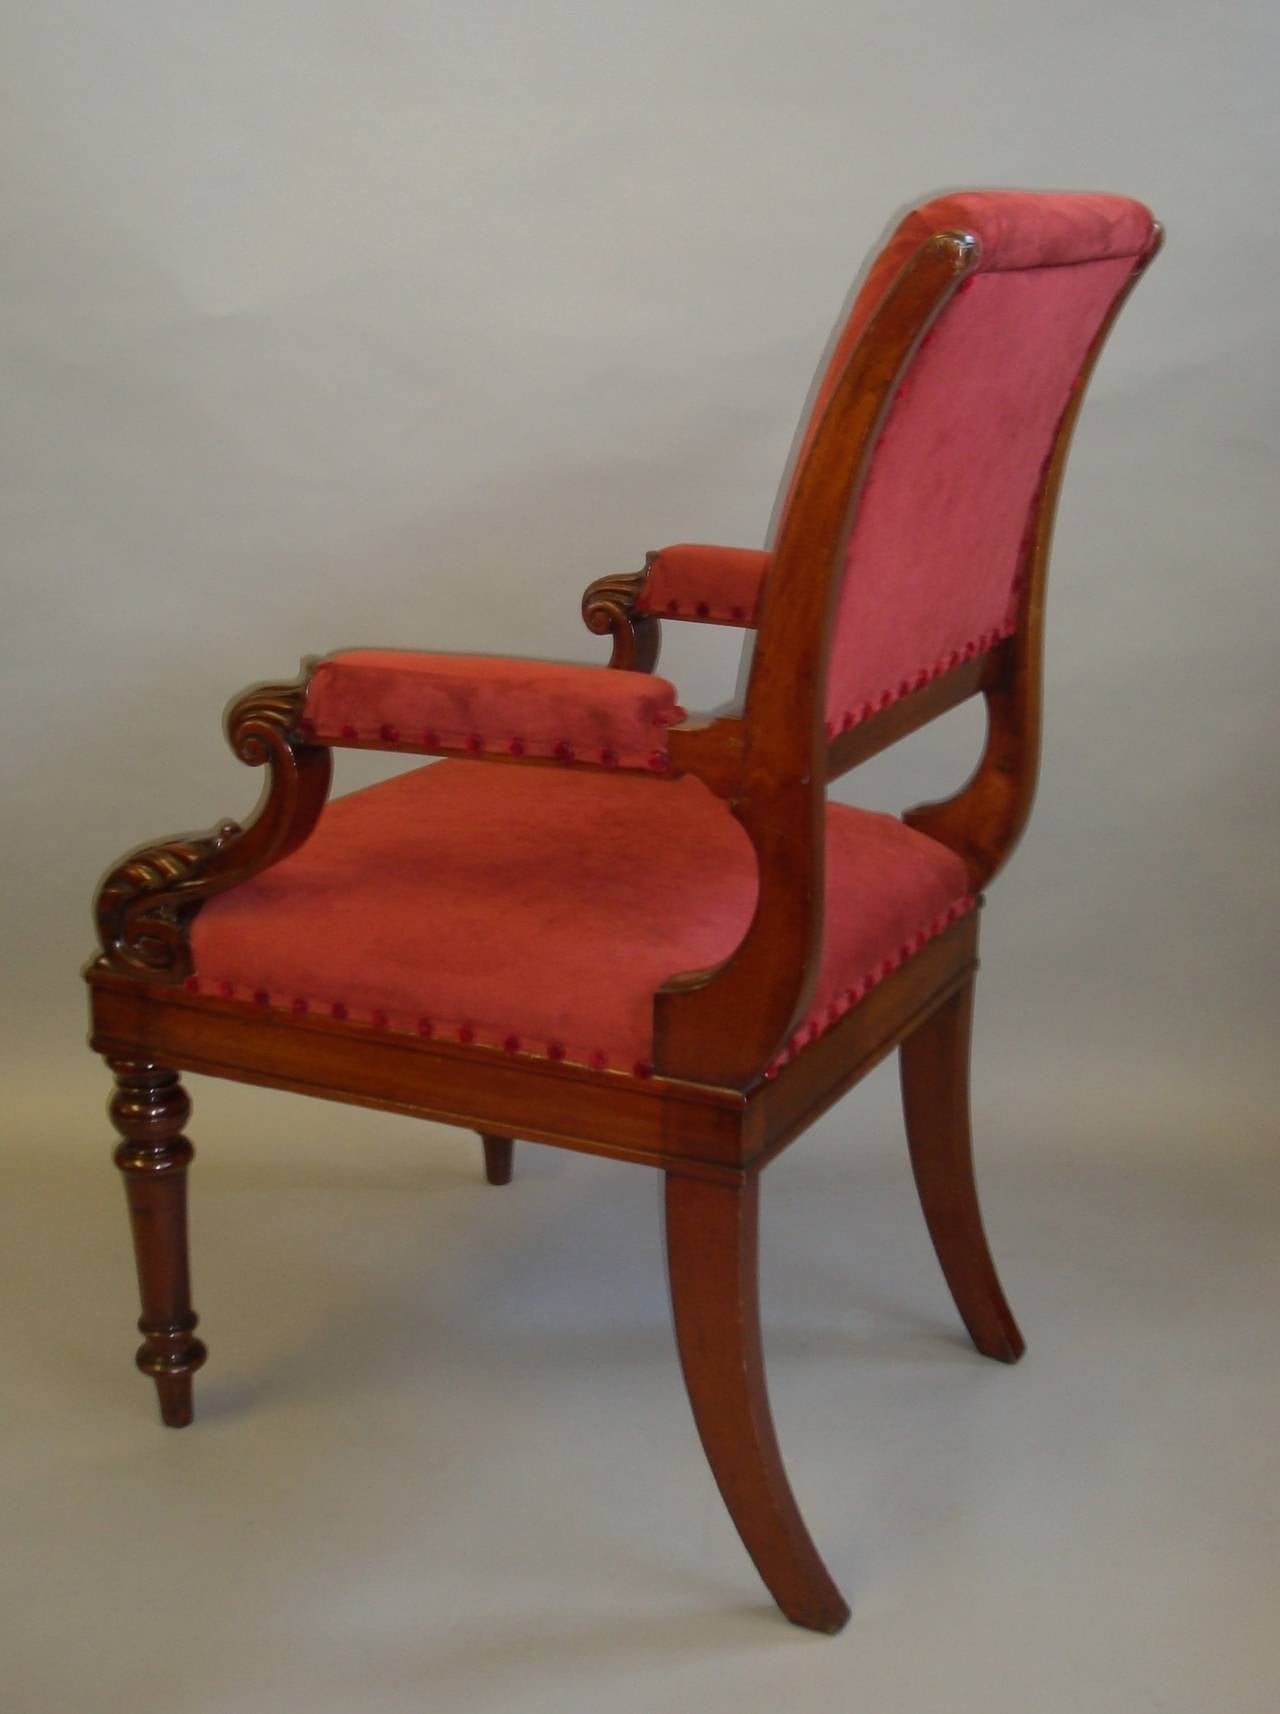 George IV Mahogany Library Chair of Bold Proportions In Excellent Condition For Sale In Moreton-in-Marsh, Gloucestershire